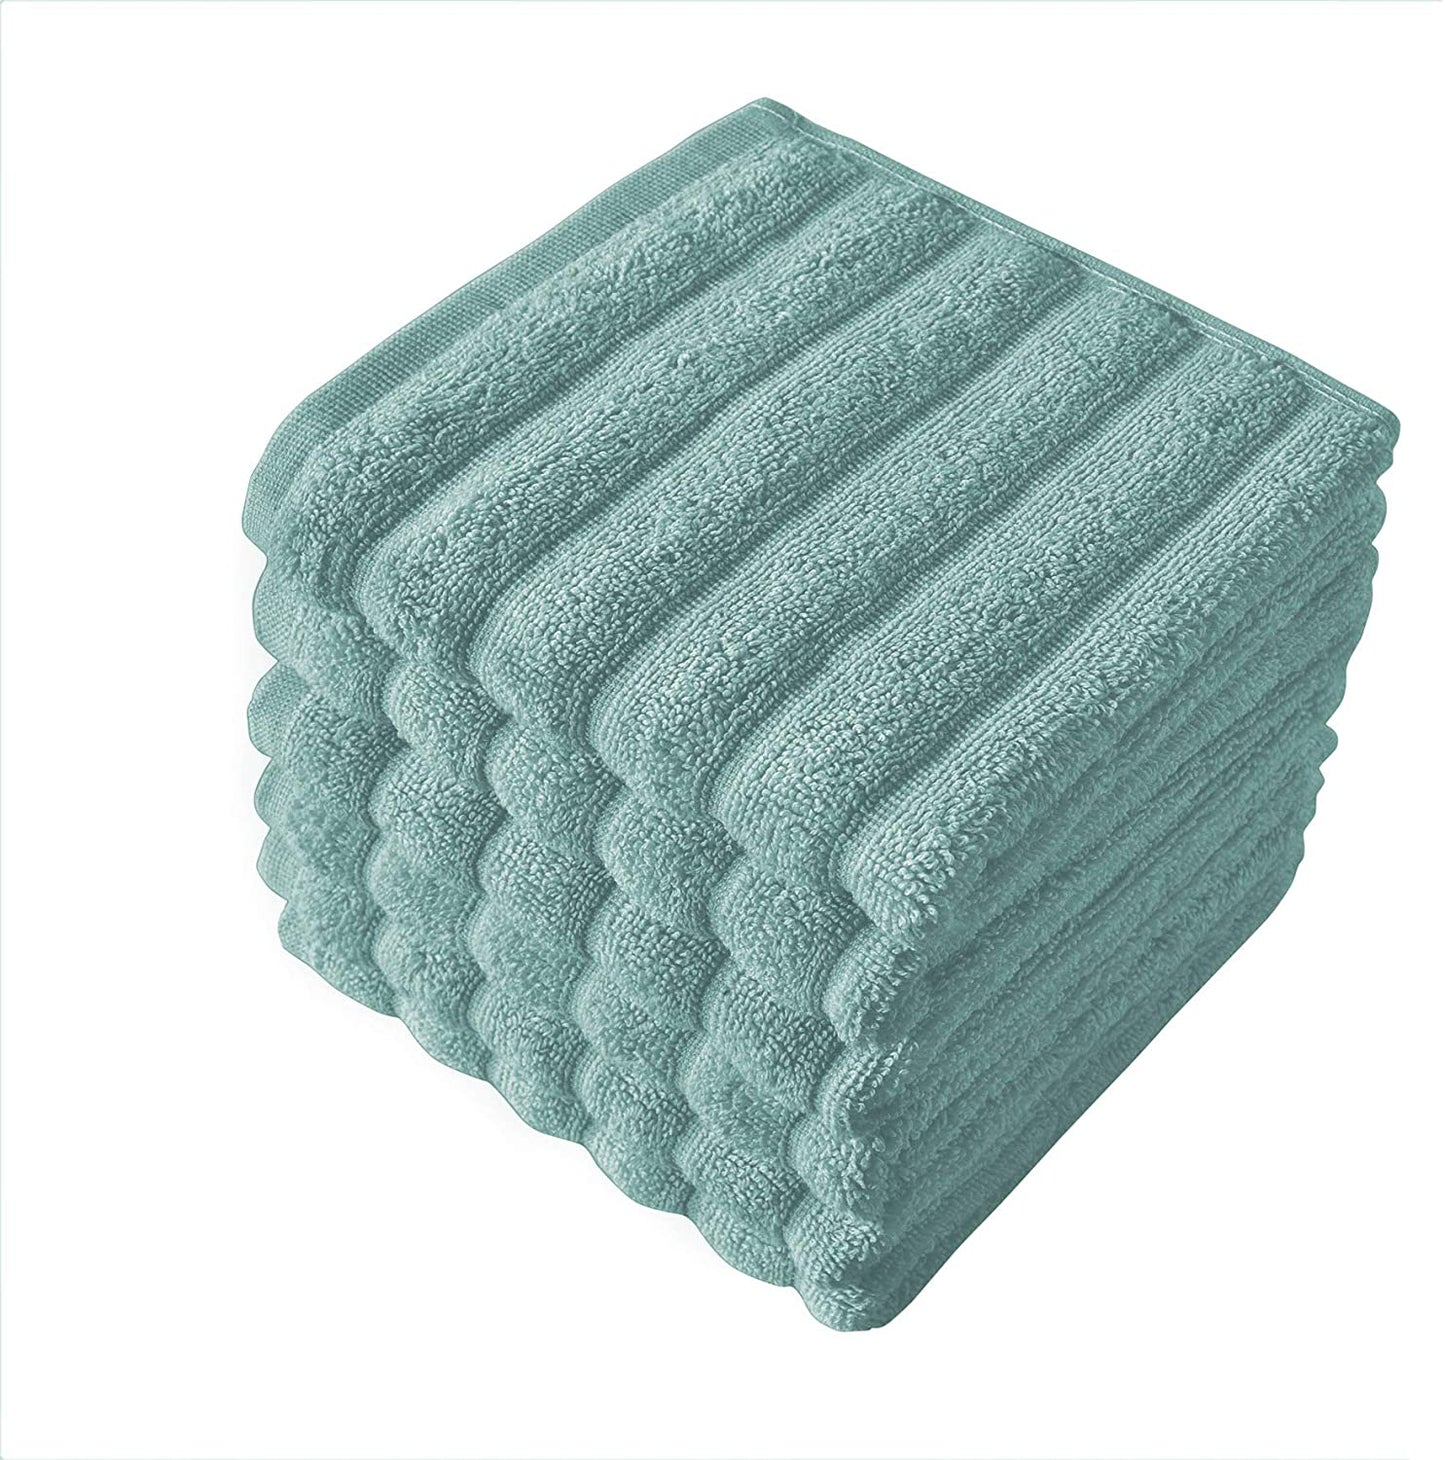 Exclusivo Mezcla - 6 Pack Ribbed Wash Cloths for Your Body and Face -100% Cotton, Soft, Absorbent and Quick Dry Face Wash Towels (Spa Green, 13 x 13 Inches)